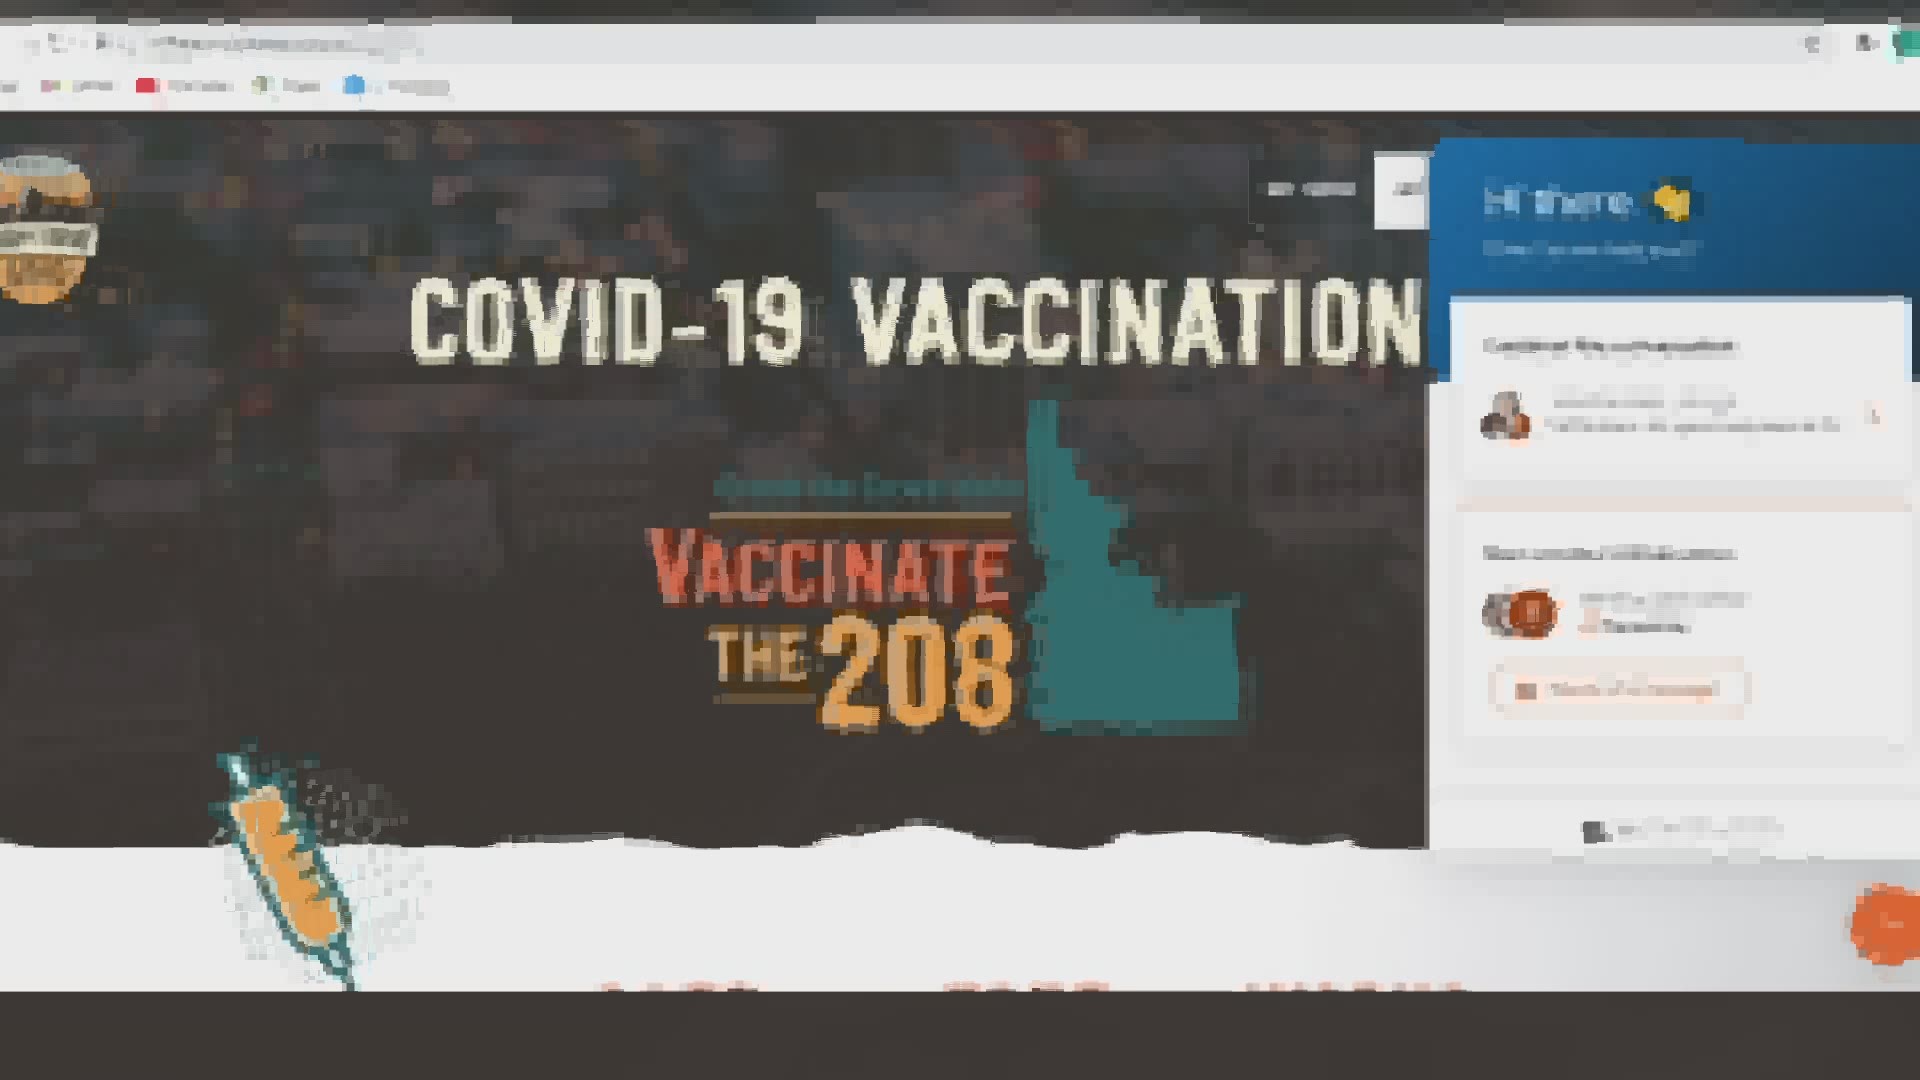 Crush the Curve, an Idaho non-profit working to slow the spread of COVID-19, is working to ensure no doses of the vaccine go to waste.